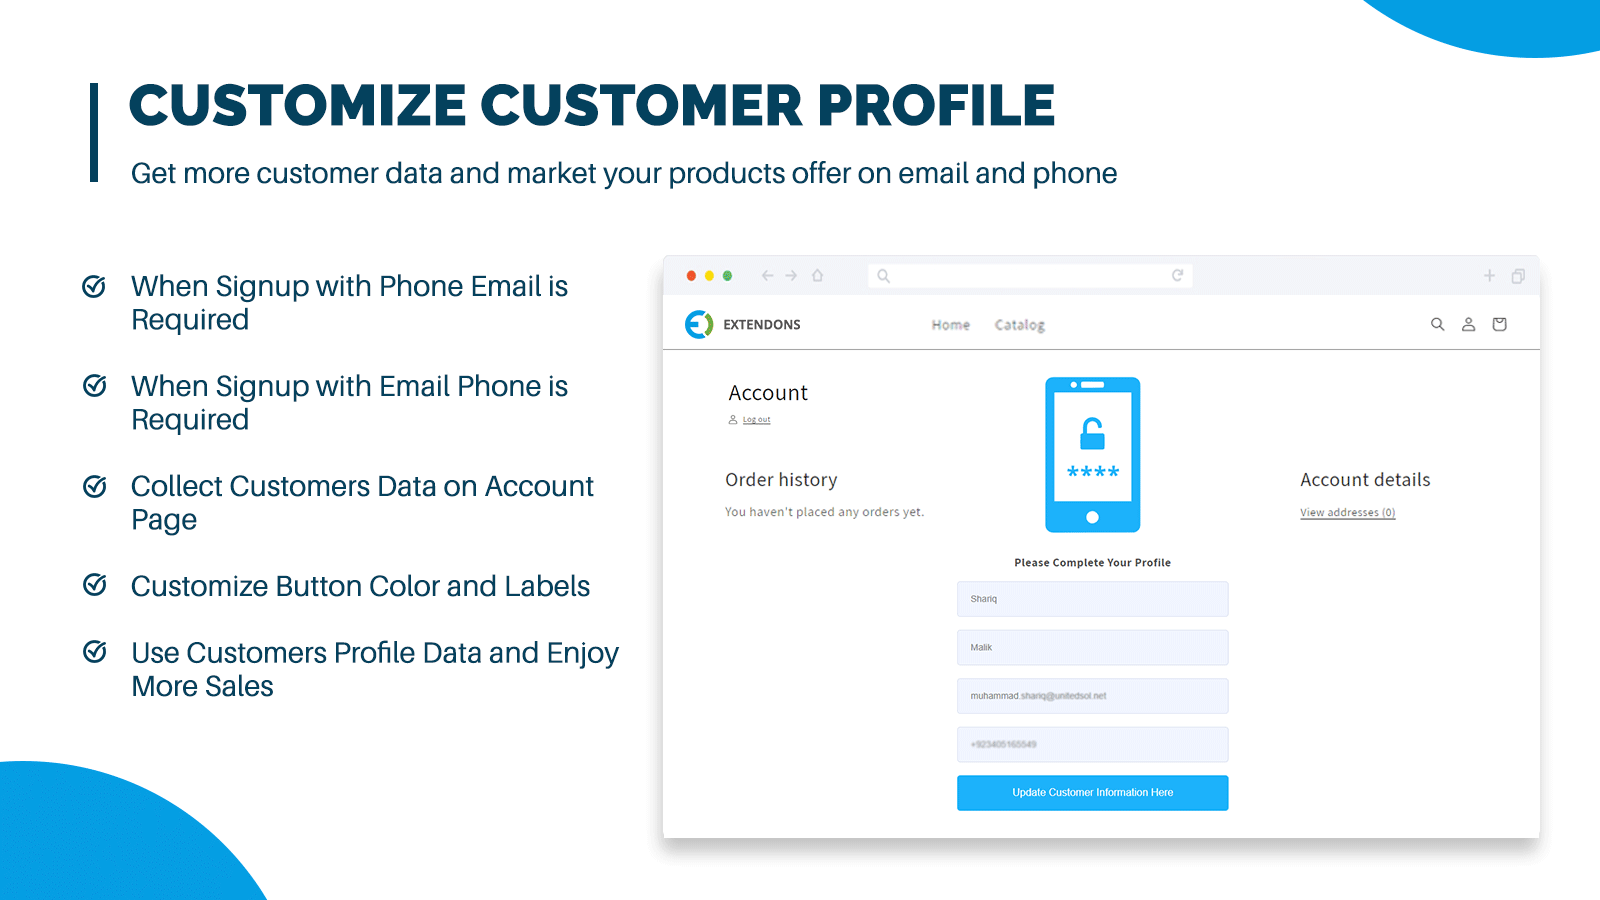 Users can Enter their Email ID on Account Page 